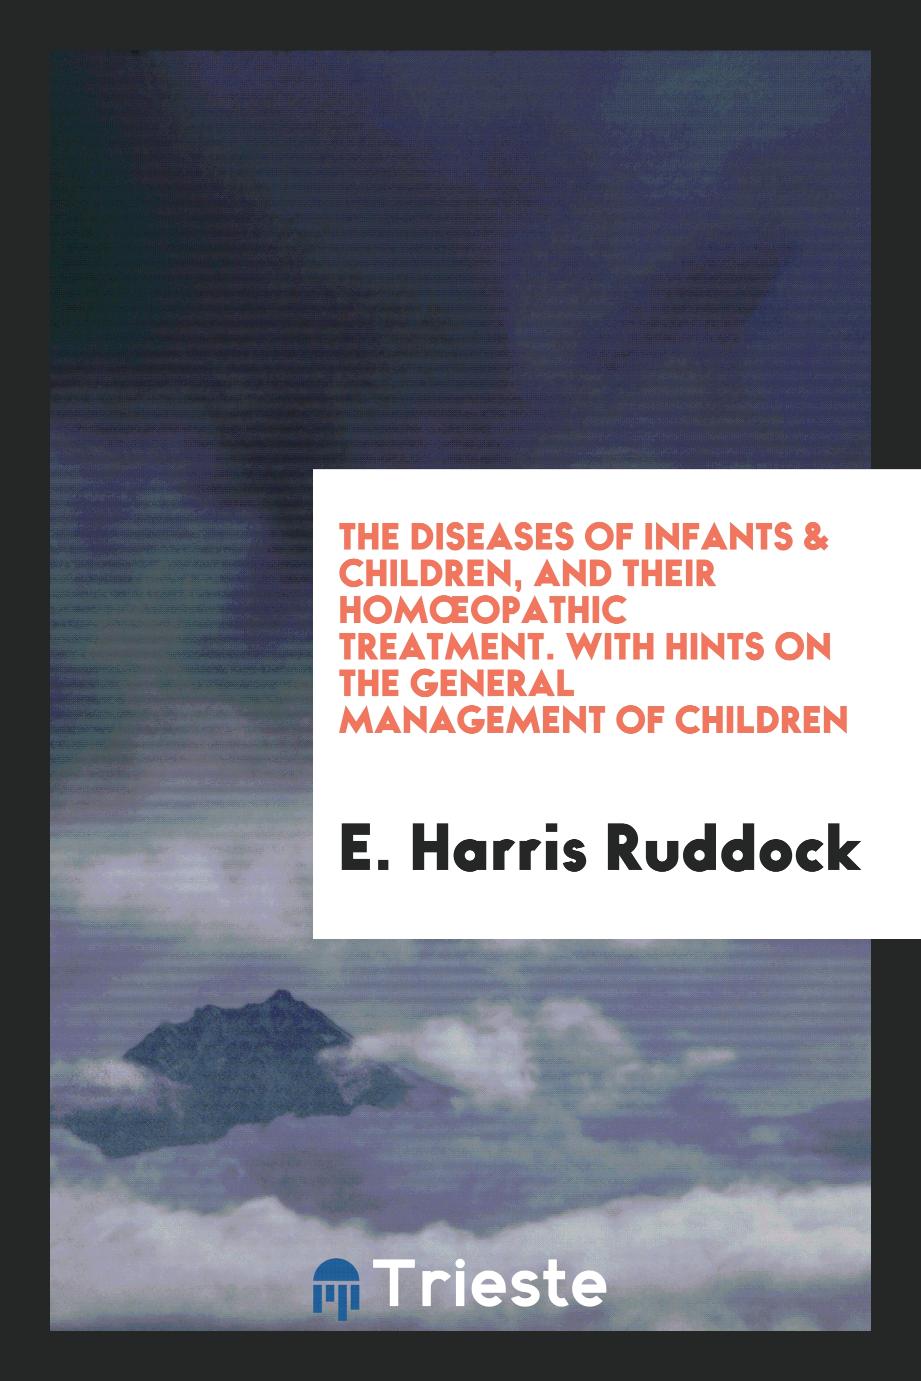 The Diseases of Infants & Children, and Their HomœOpathic Treatment. With Hints on the General Management of Children